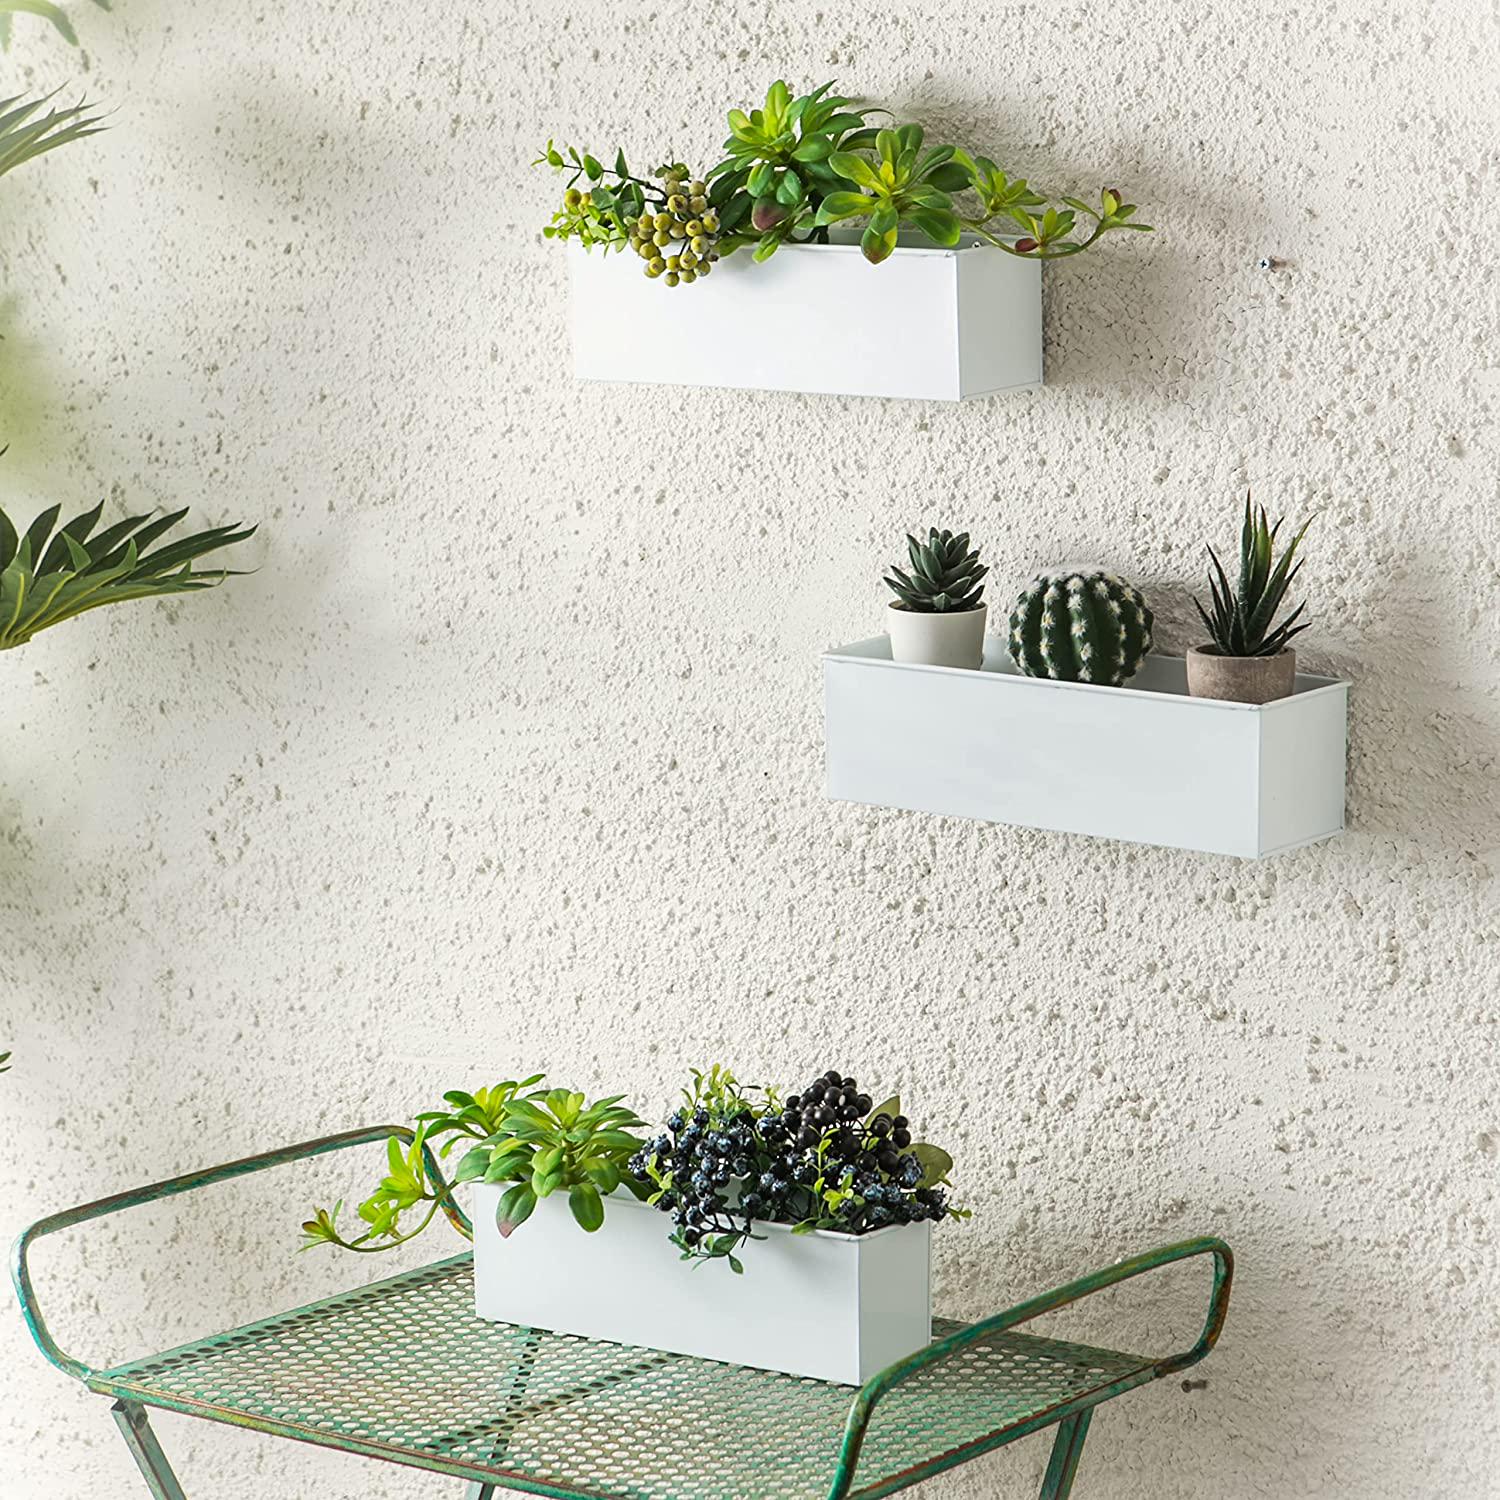 LaLaGreen Wall Planter - 3 Pack, 12 Inch Wall Hanging Plant Holders White, Large Long Rectangular Metal Wall Mounted Flower Pots, Window Sill Planter Box Fence Railings Floating Shelve Indoor Outdoor-